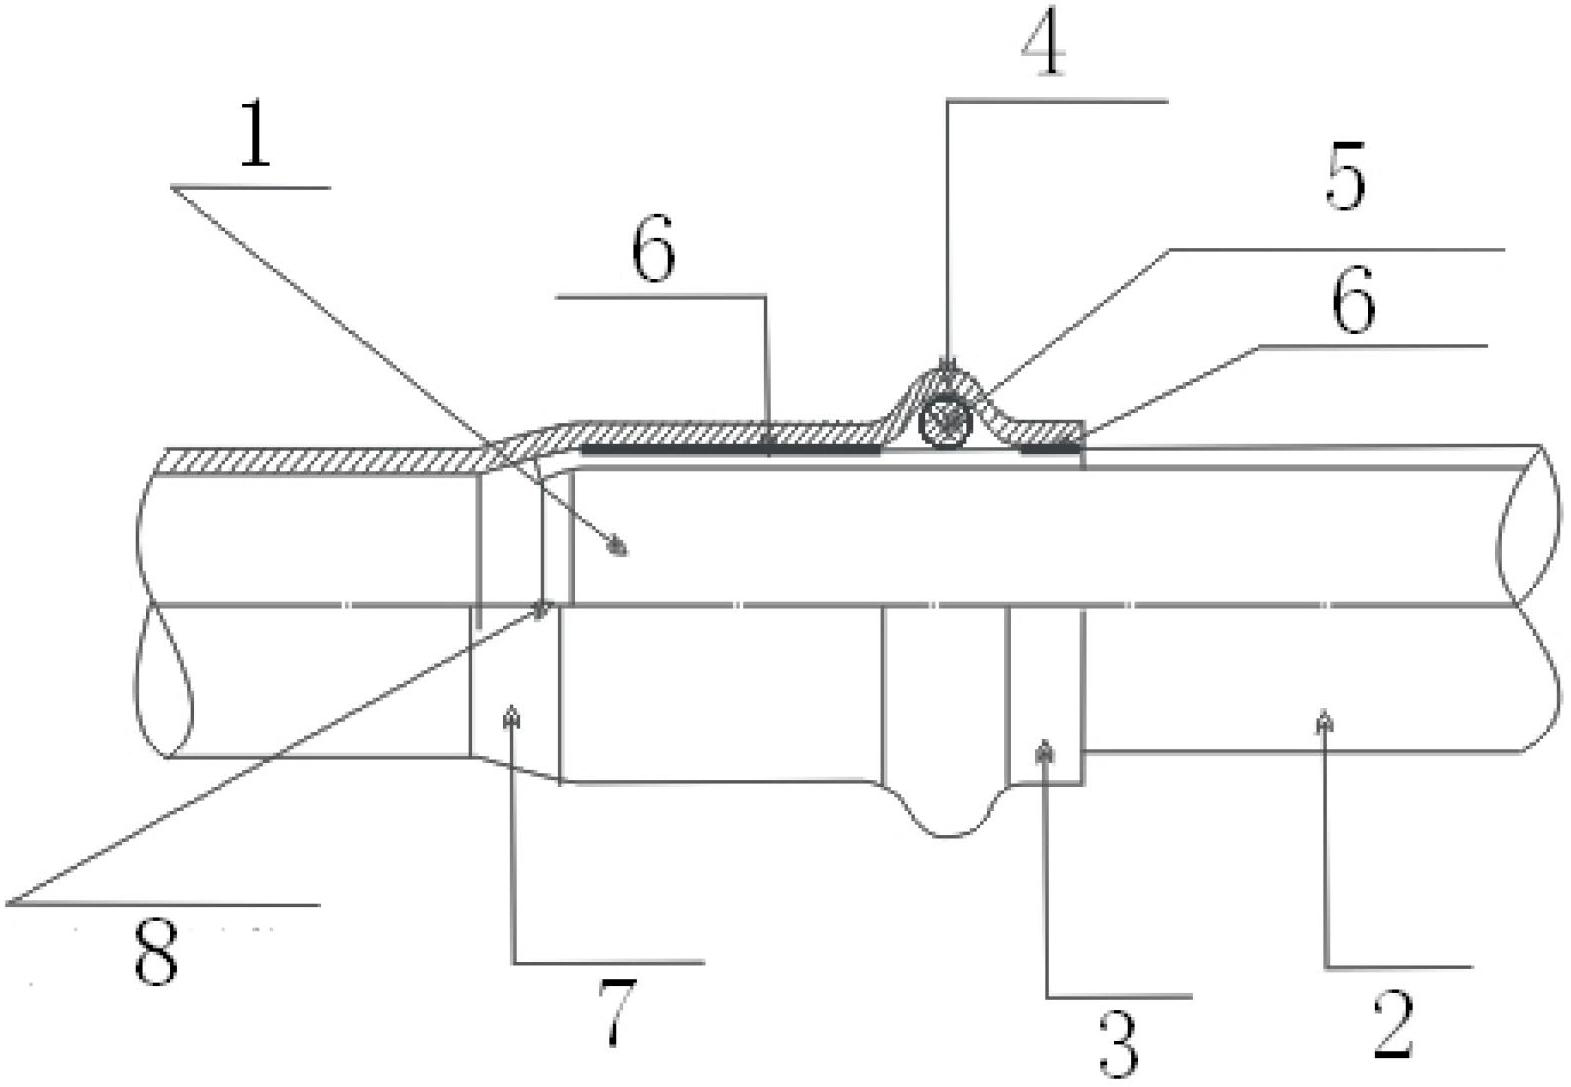 Process method for connecting metal-extrusion type pipe fitting with high infiltration prevention